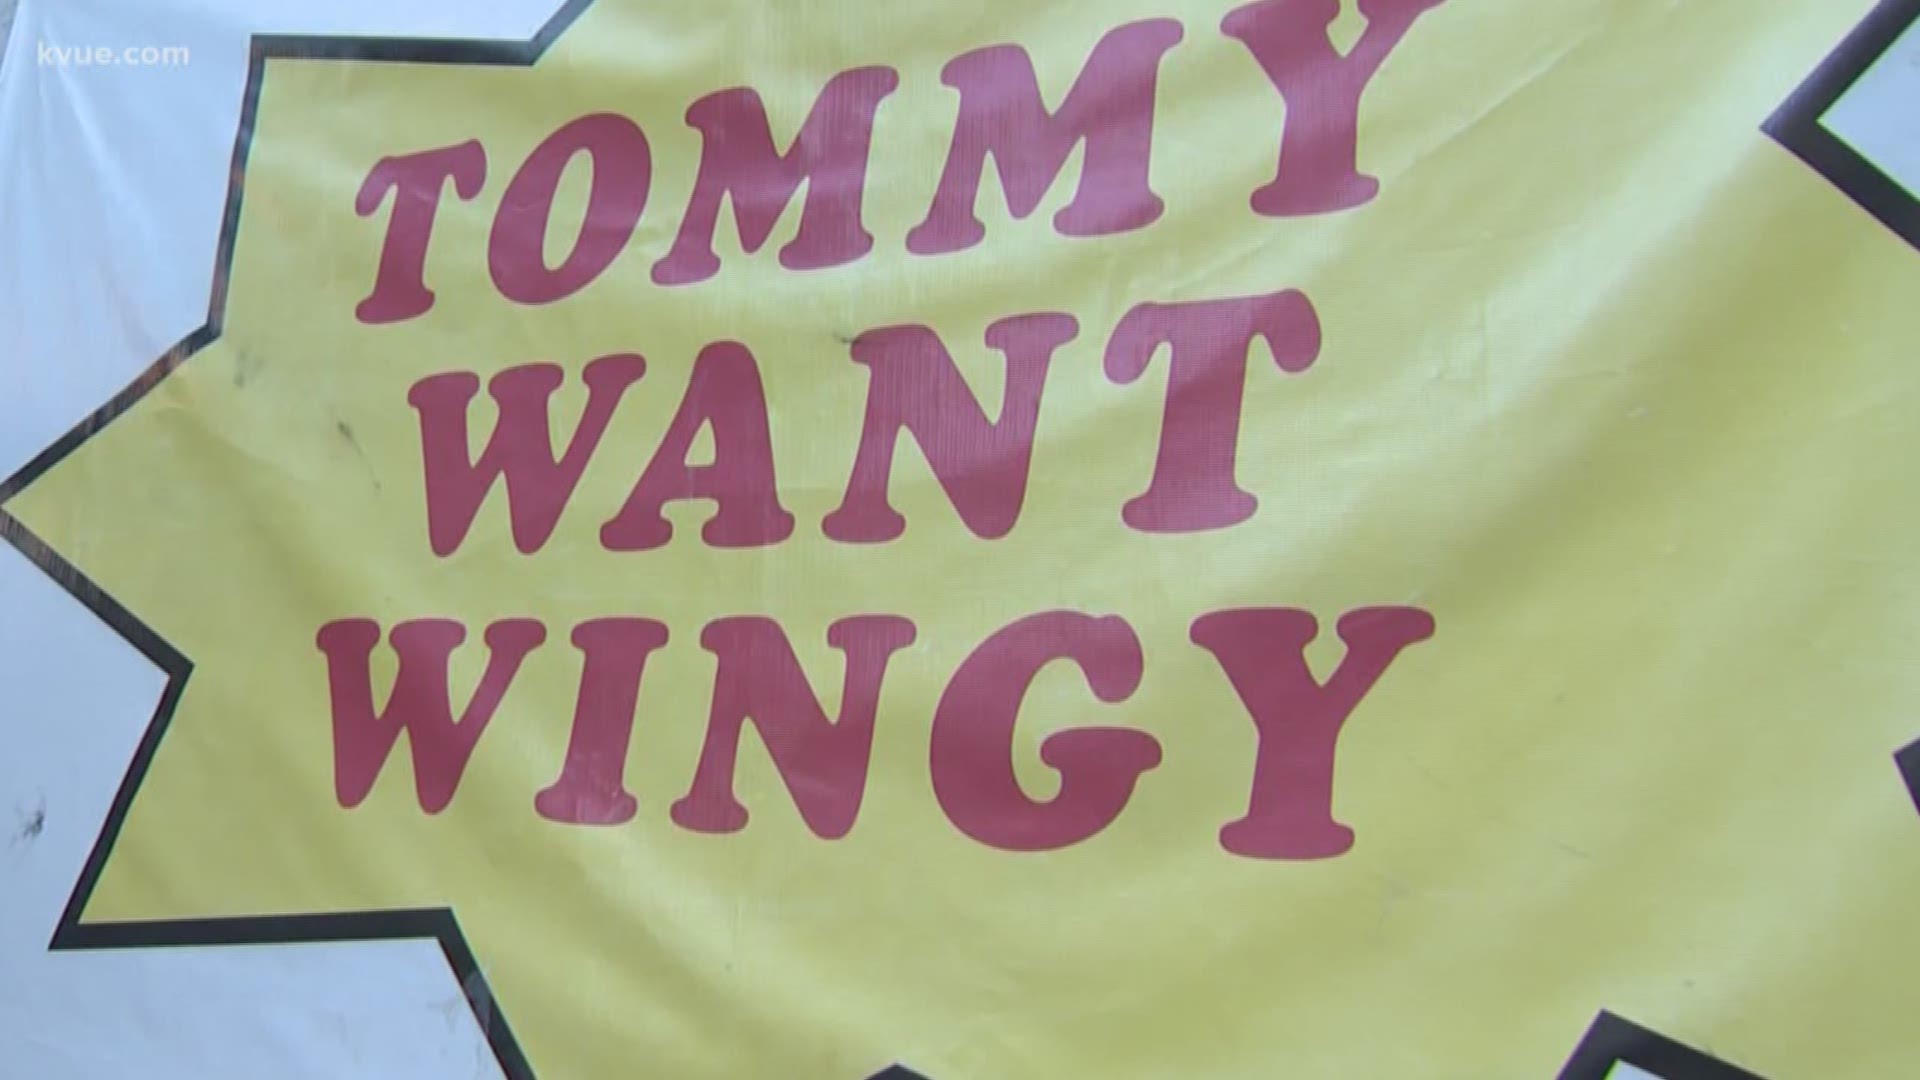 Tommy Want Wingy is located next to Lustre Pearl off Rainey Street. The wings are tasty and the story behind this business is even better.